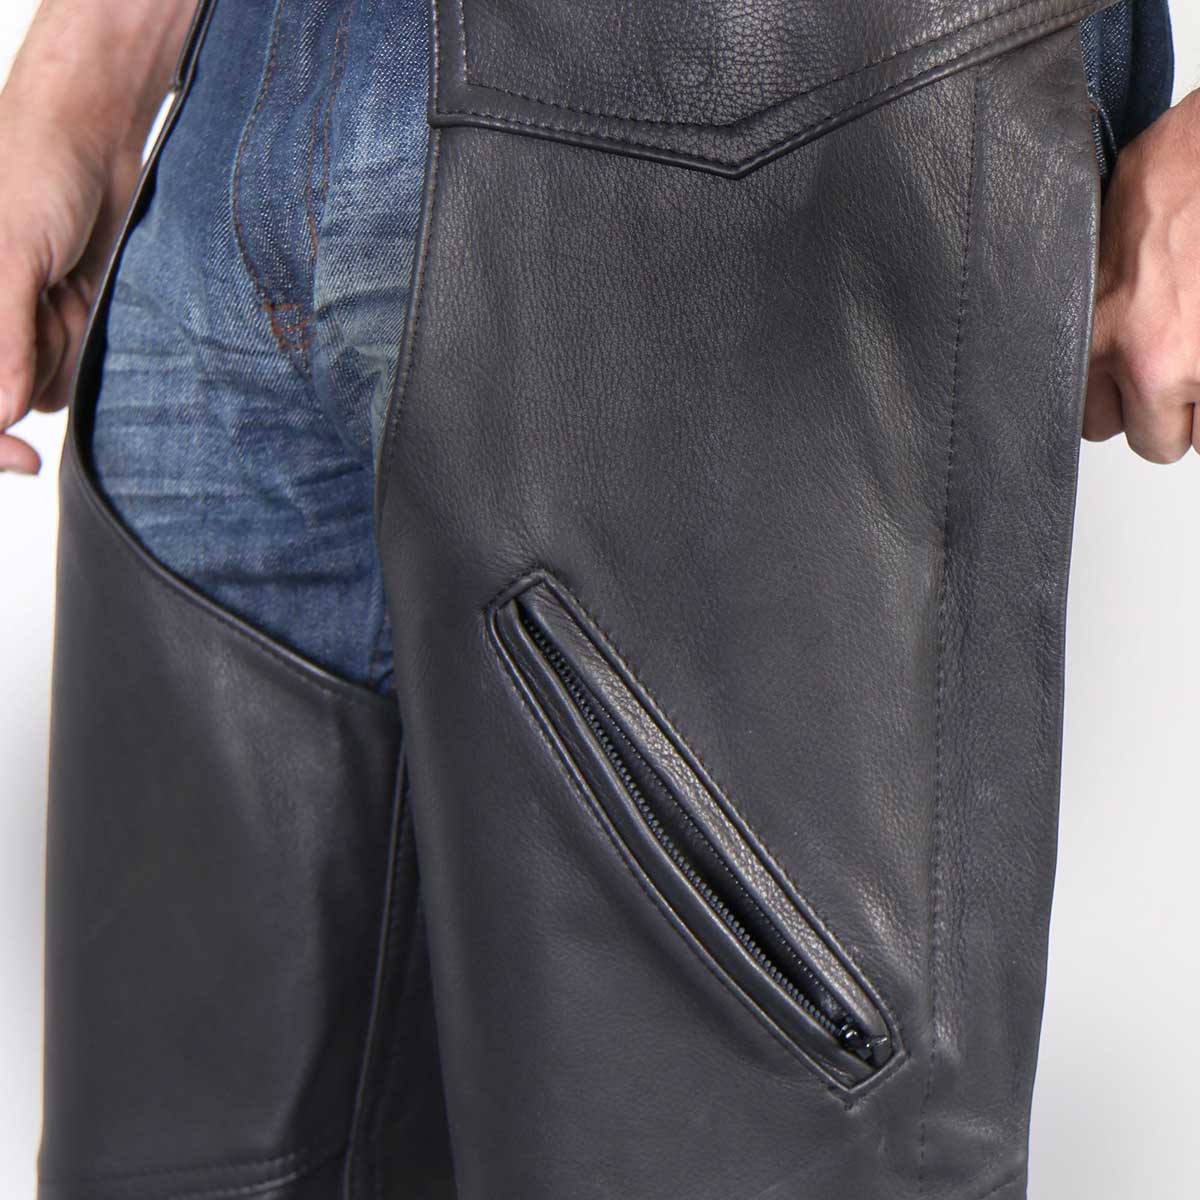 Hot Leathers CHM5001 USA Made Men's Classic Black Premium Leather Motorcycle Chaps